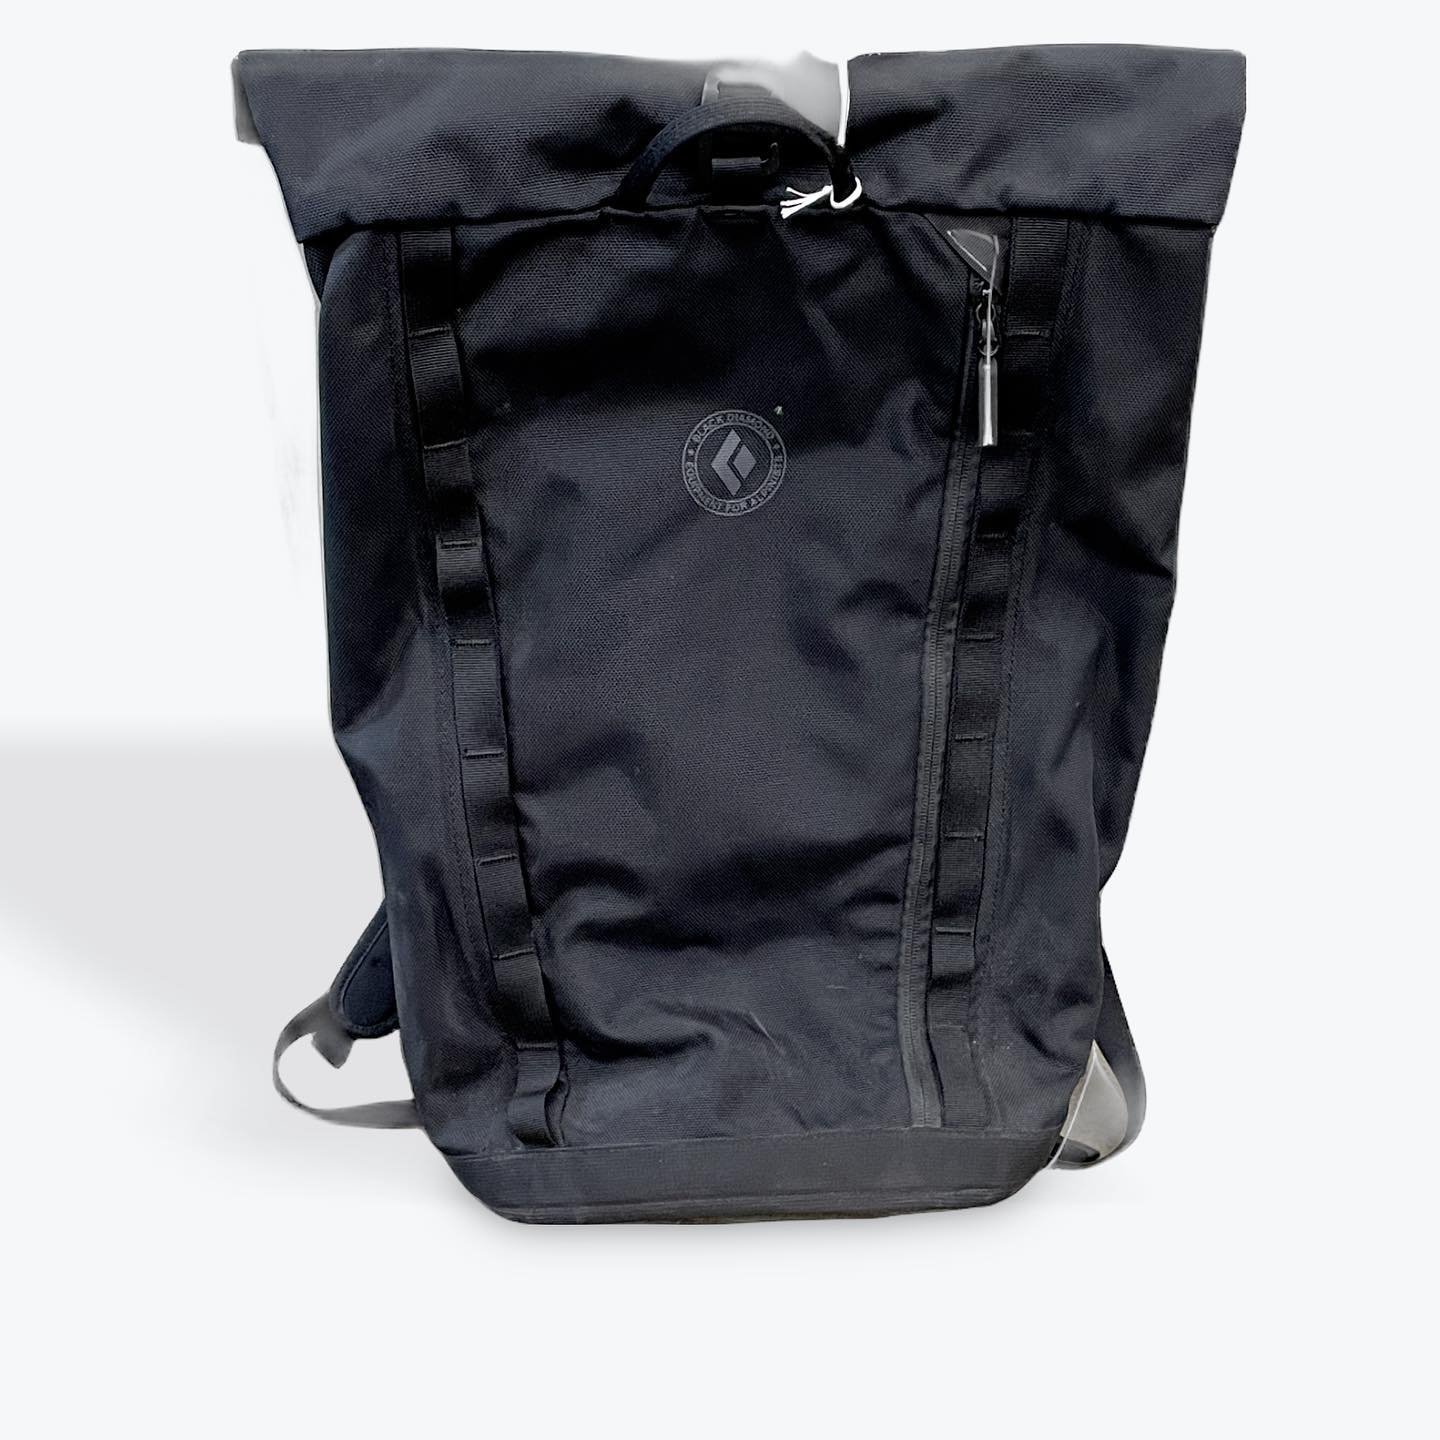 From Crag to Classroom with this baddie. 

Black Diamond Street Creek 30 backpack
MSRP: $139
CC:$44